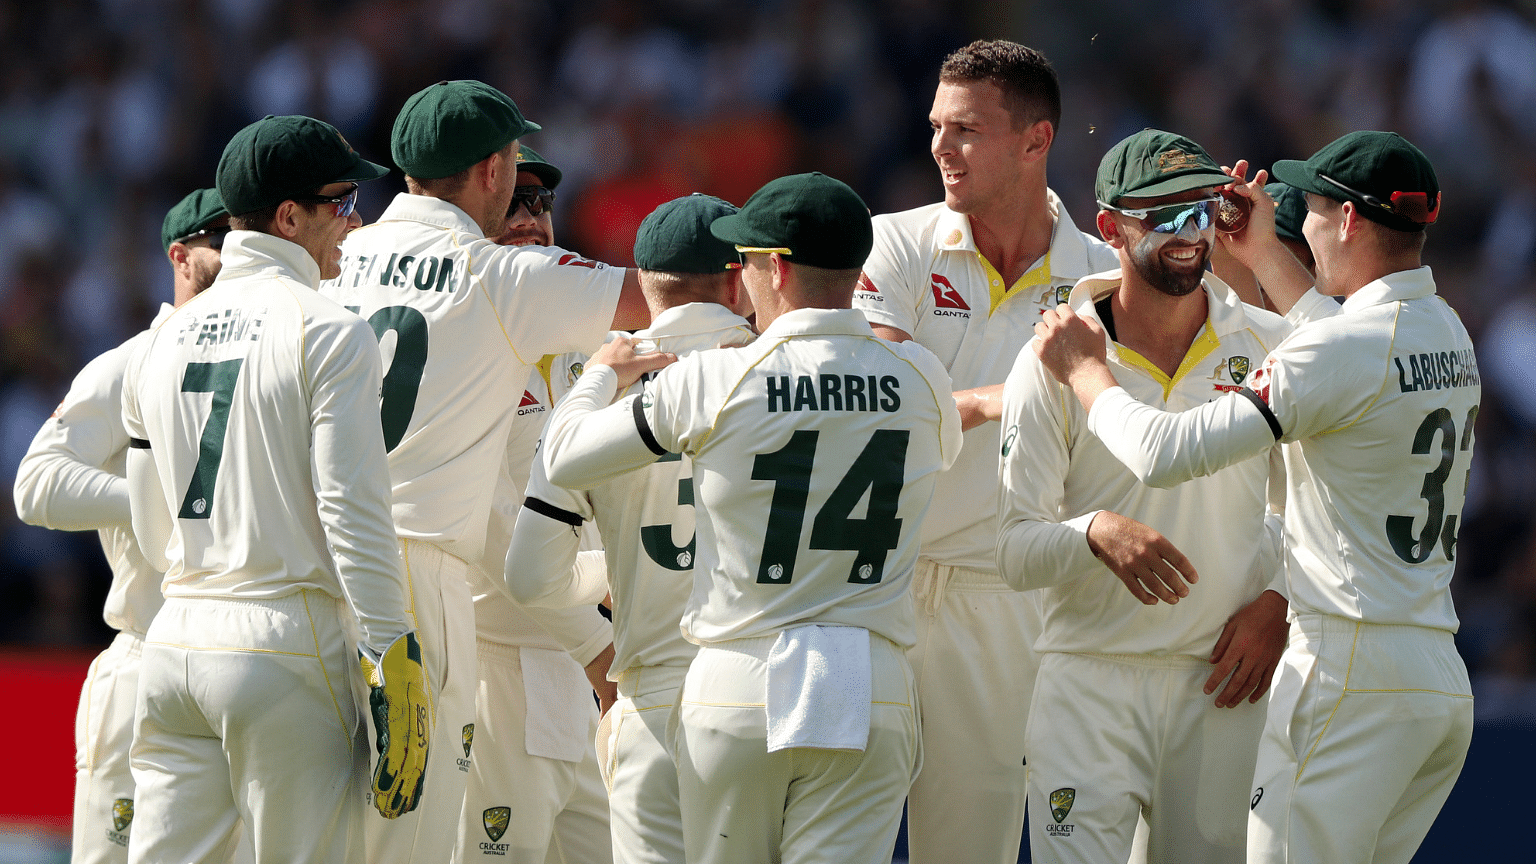 After winning the first Test, Australia lead the five-match series 1-0.